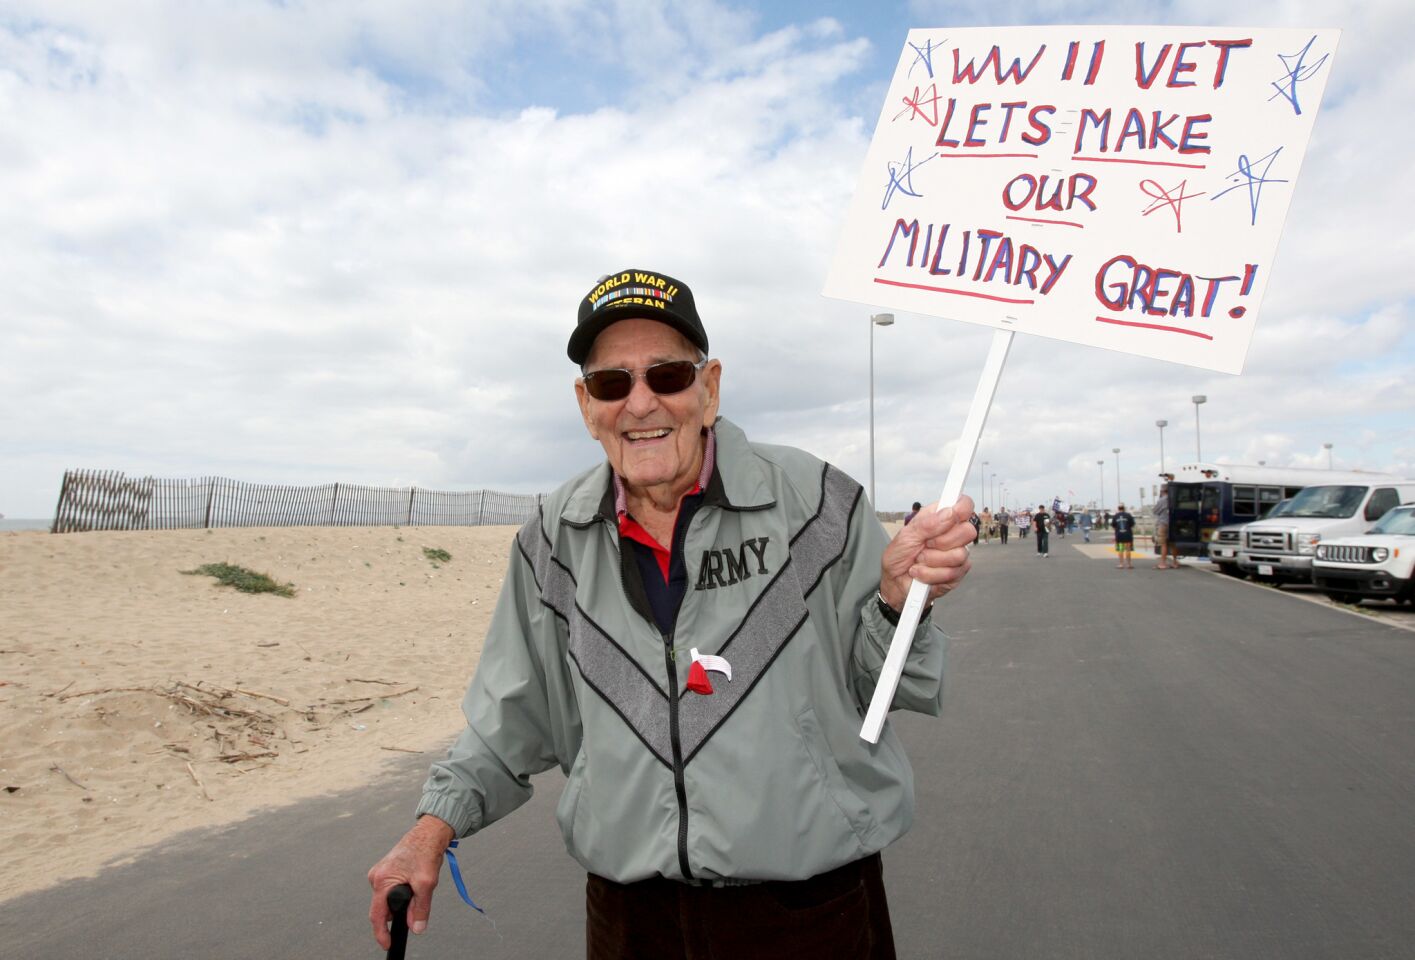 World War II U.S. Army veteran Jack Stitzinger, 93, who served with Gen. George S. Patton at the Battle of the Bulge, attended the Make America Great Again March at Bolsa Chica State Beach in Huntington Beach on Saturday. Stitzinger lives in Huntington Beach.